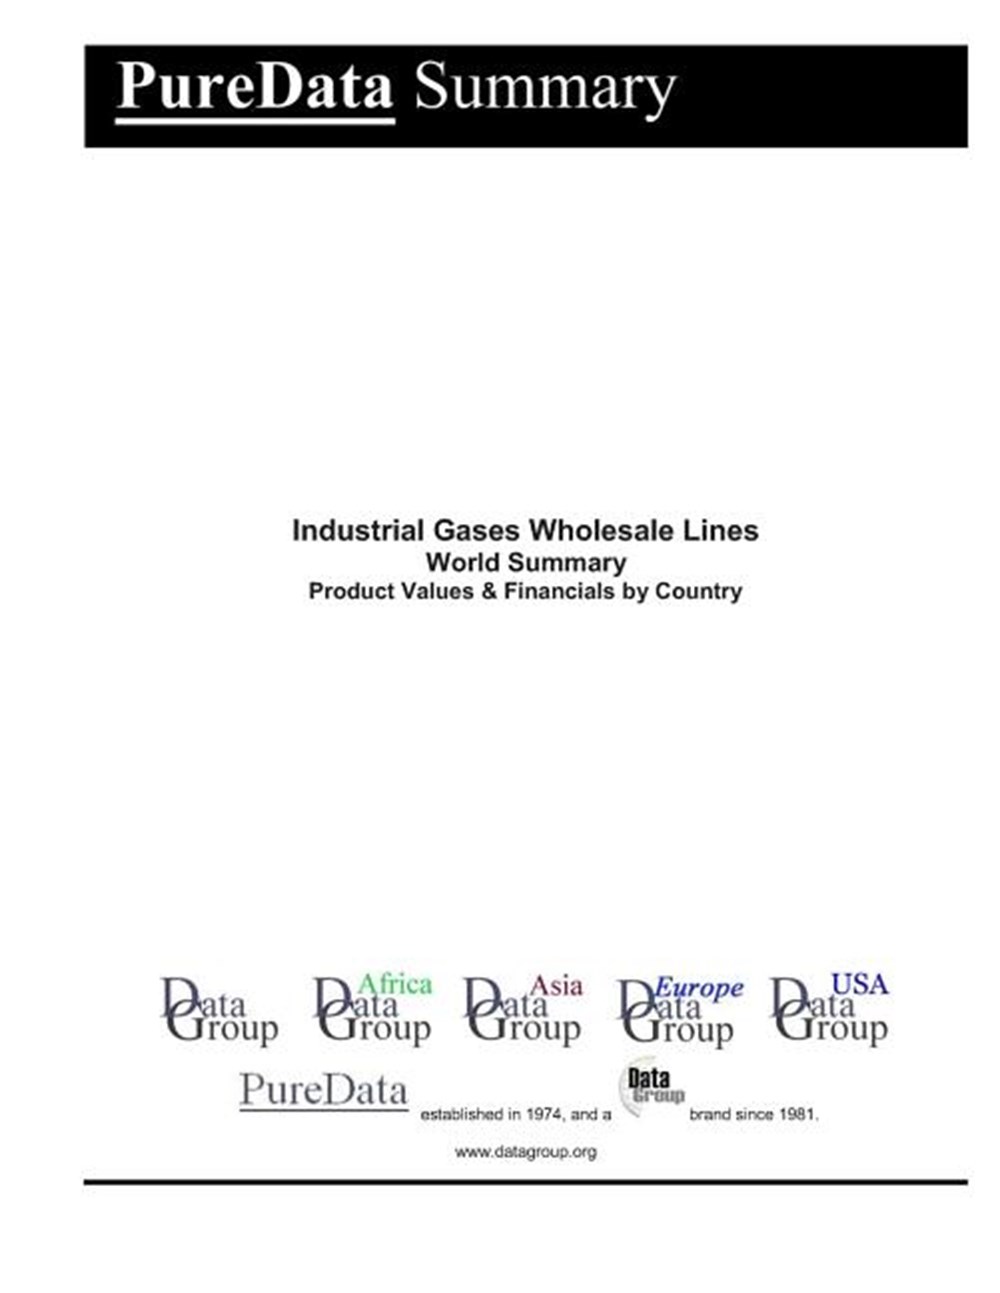 Industrial Gases Wholesale Lines World Summary Product Values & Financials by Country